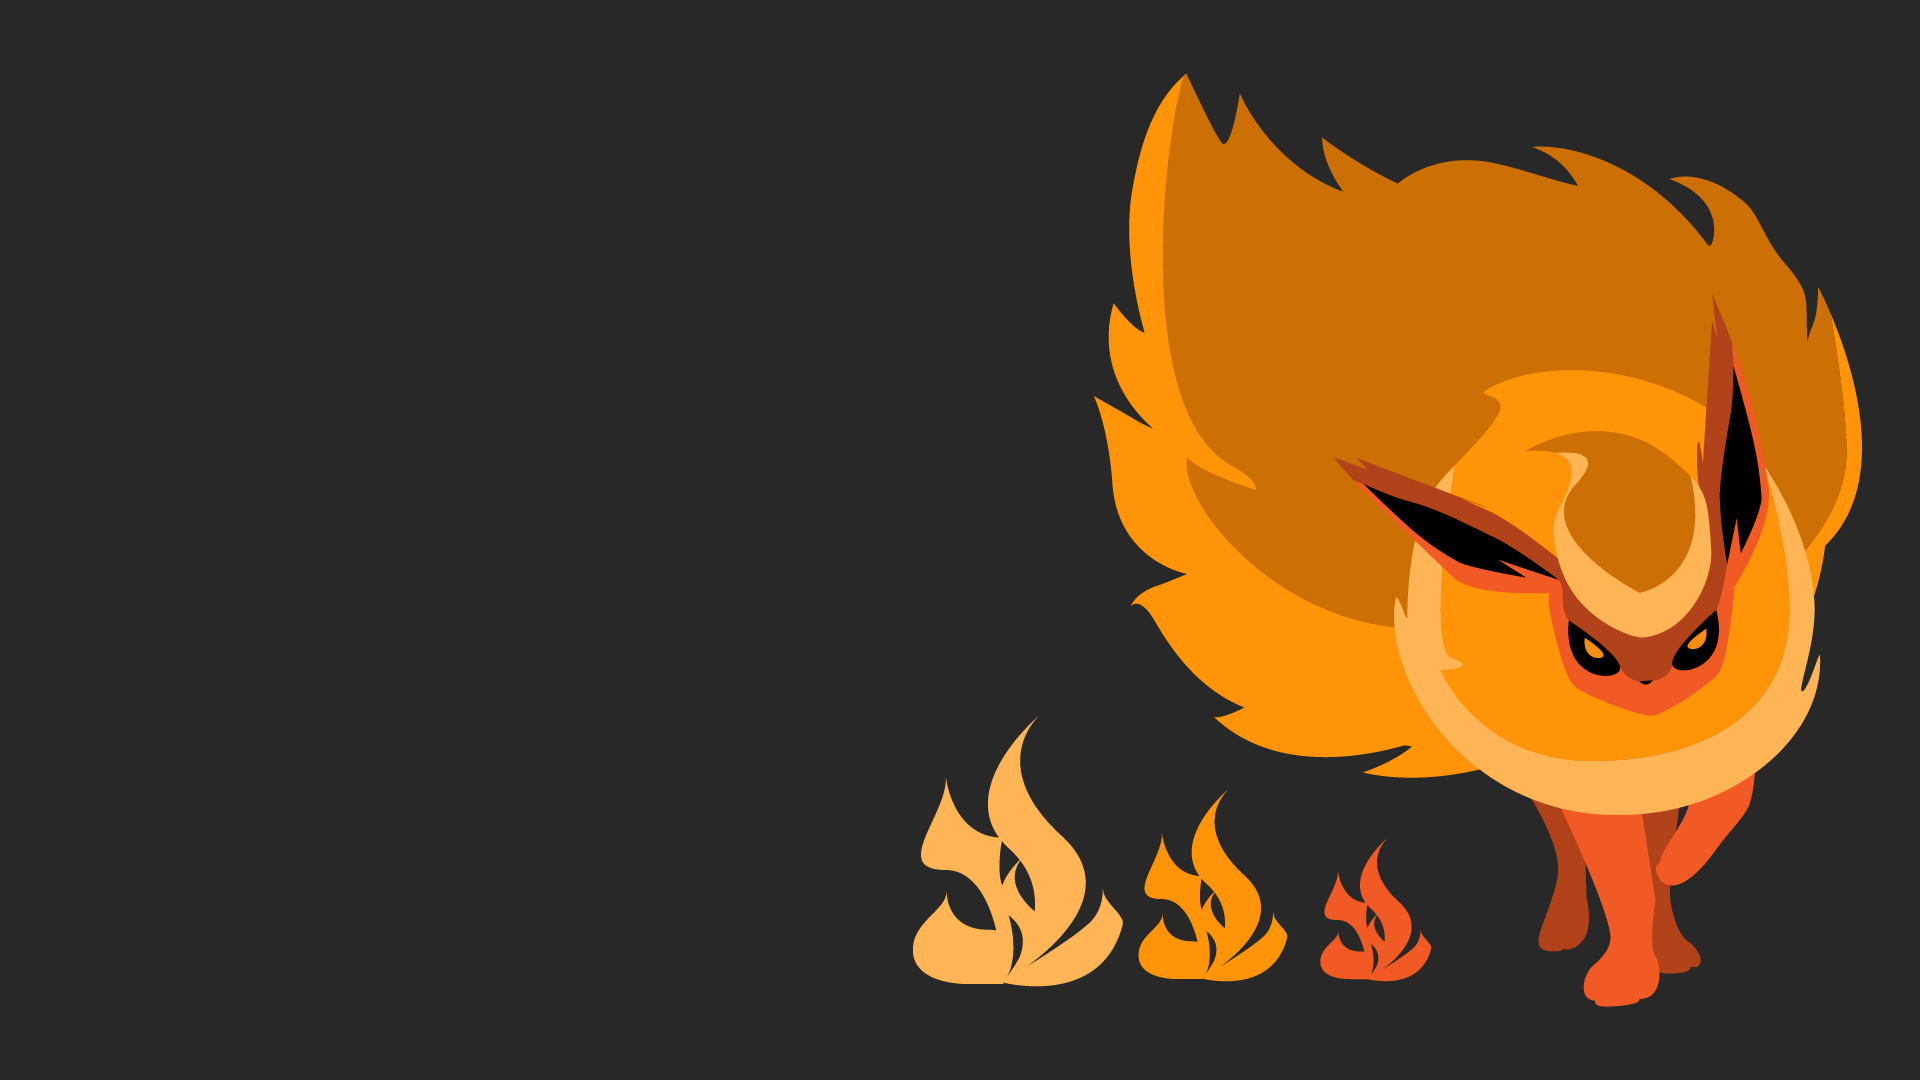 1920x1080 [OC] Flareon 1080p wallpaper (+shiny version in comments) ...